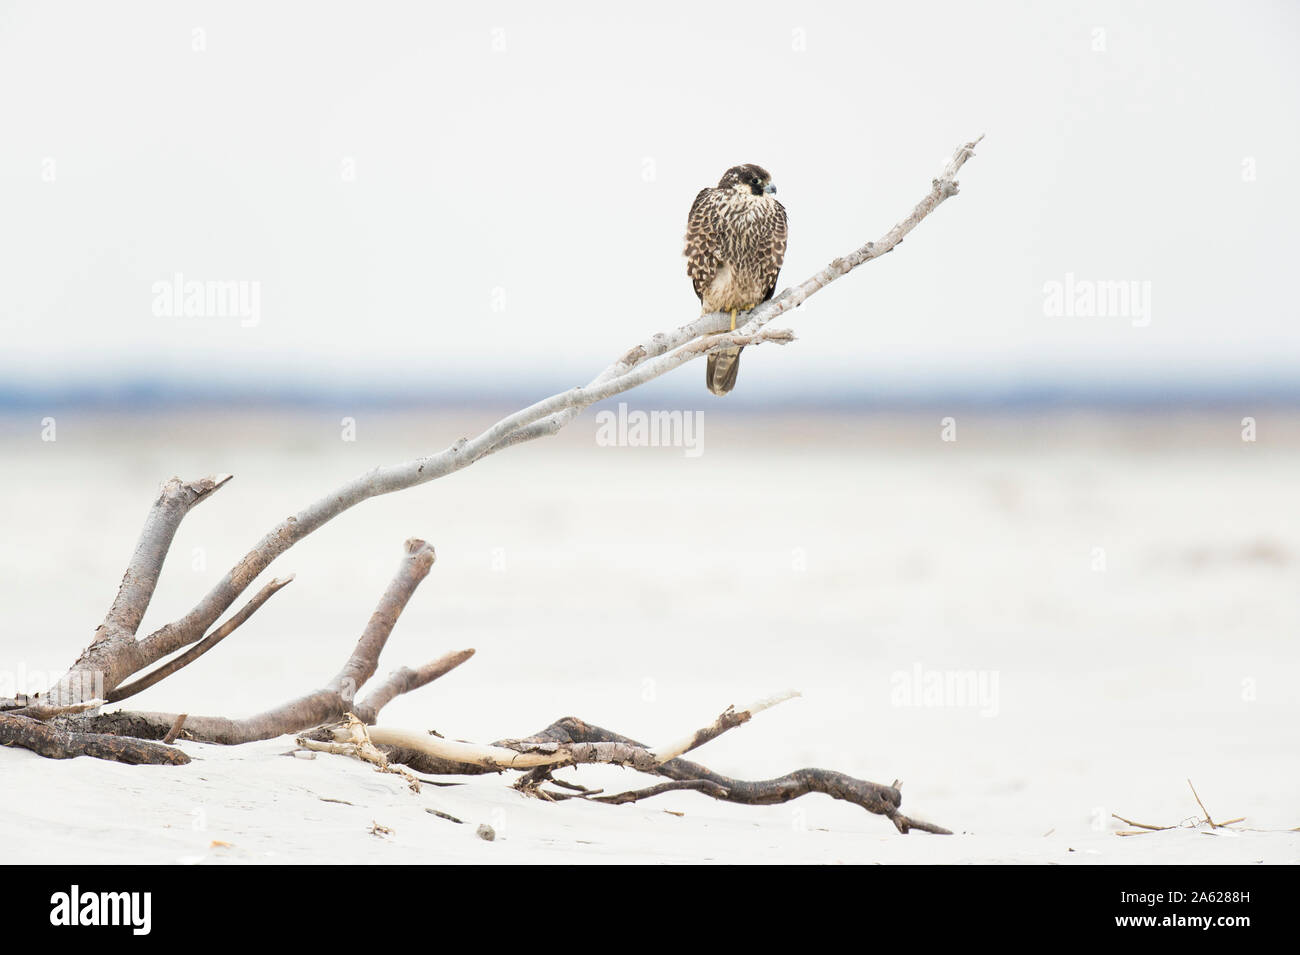 A Peregrine Falcon perched on a piece of driftwood on the wide open beach in soft overcast light. Stock Photo